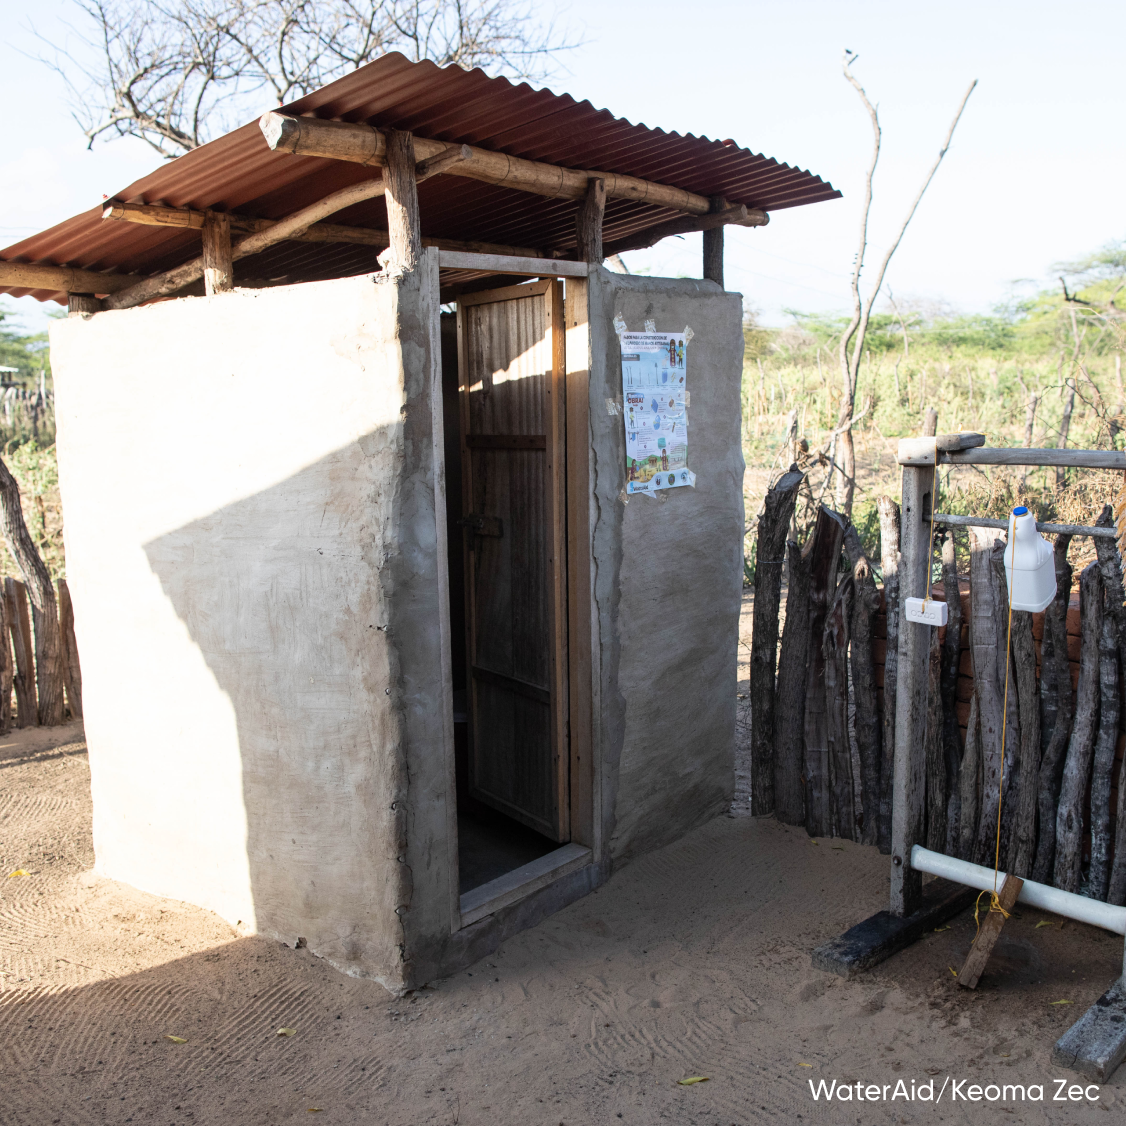 A small toilet outbuilding with some sort of plaster on the outside, a tin roof, and an arid landscape in the background 